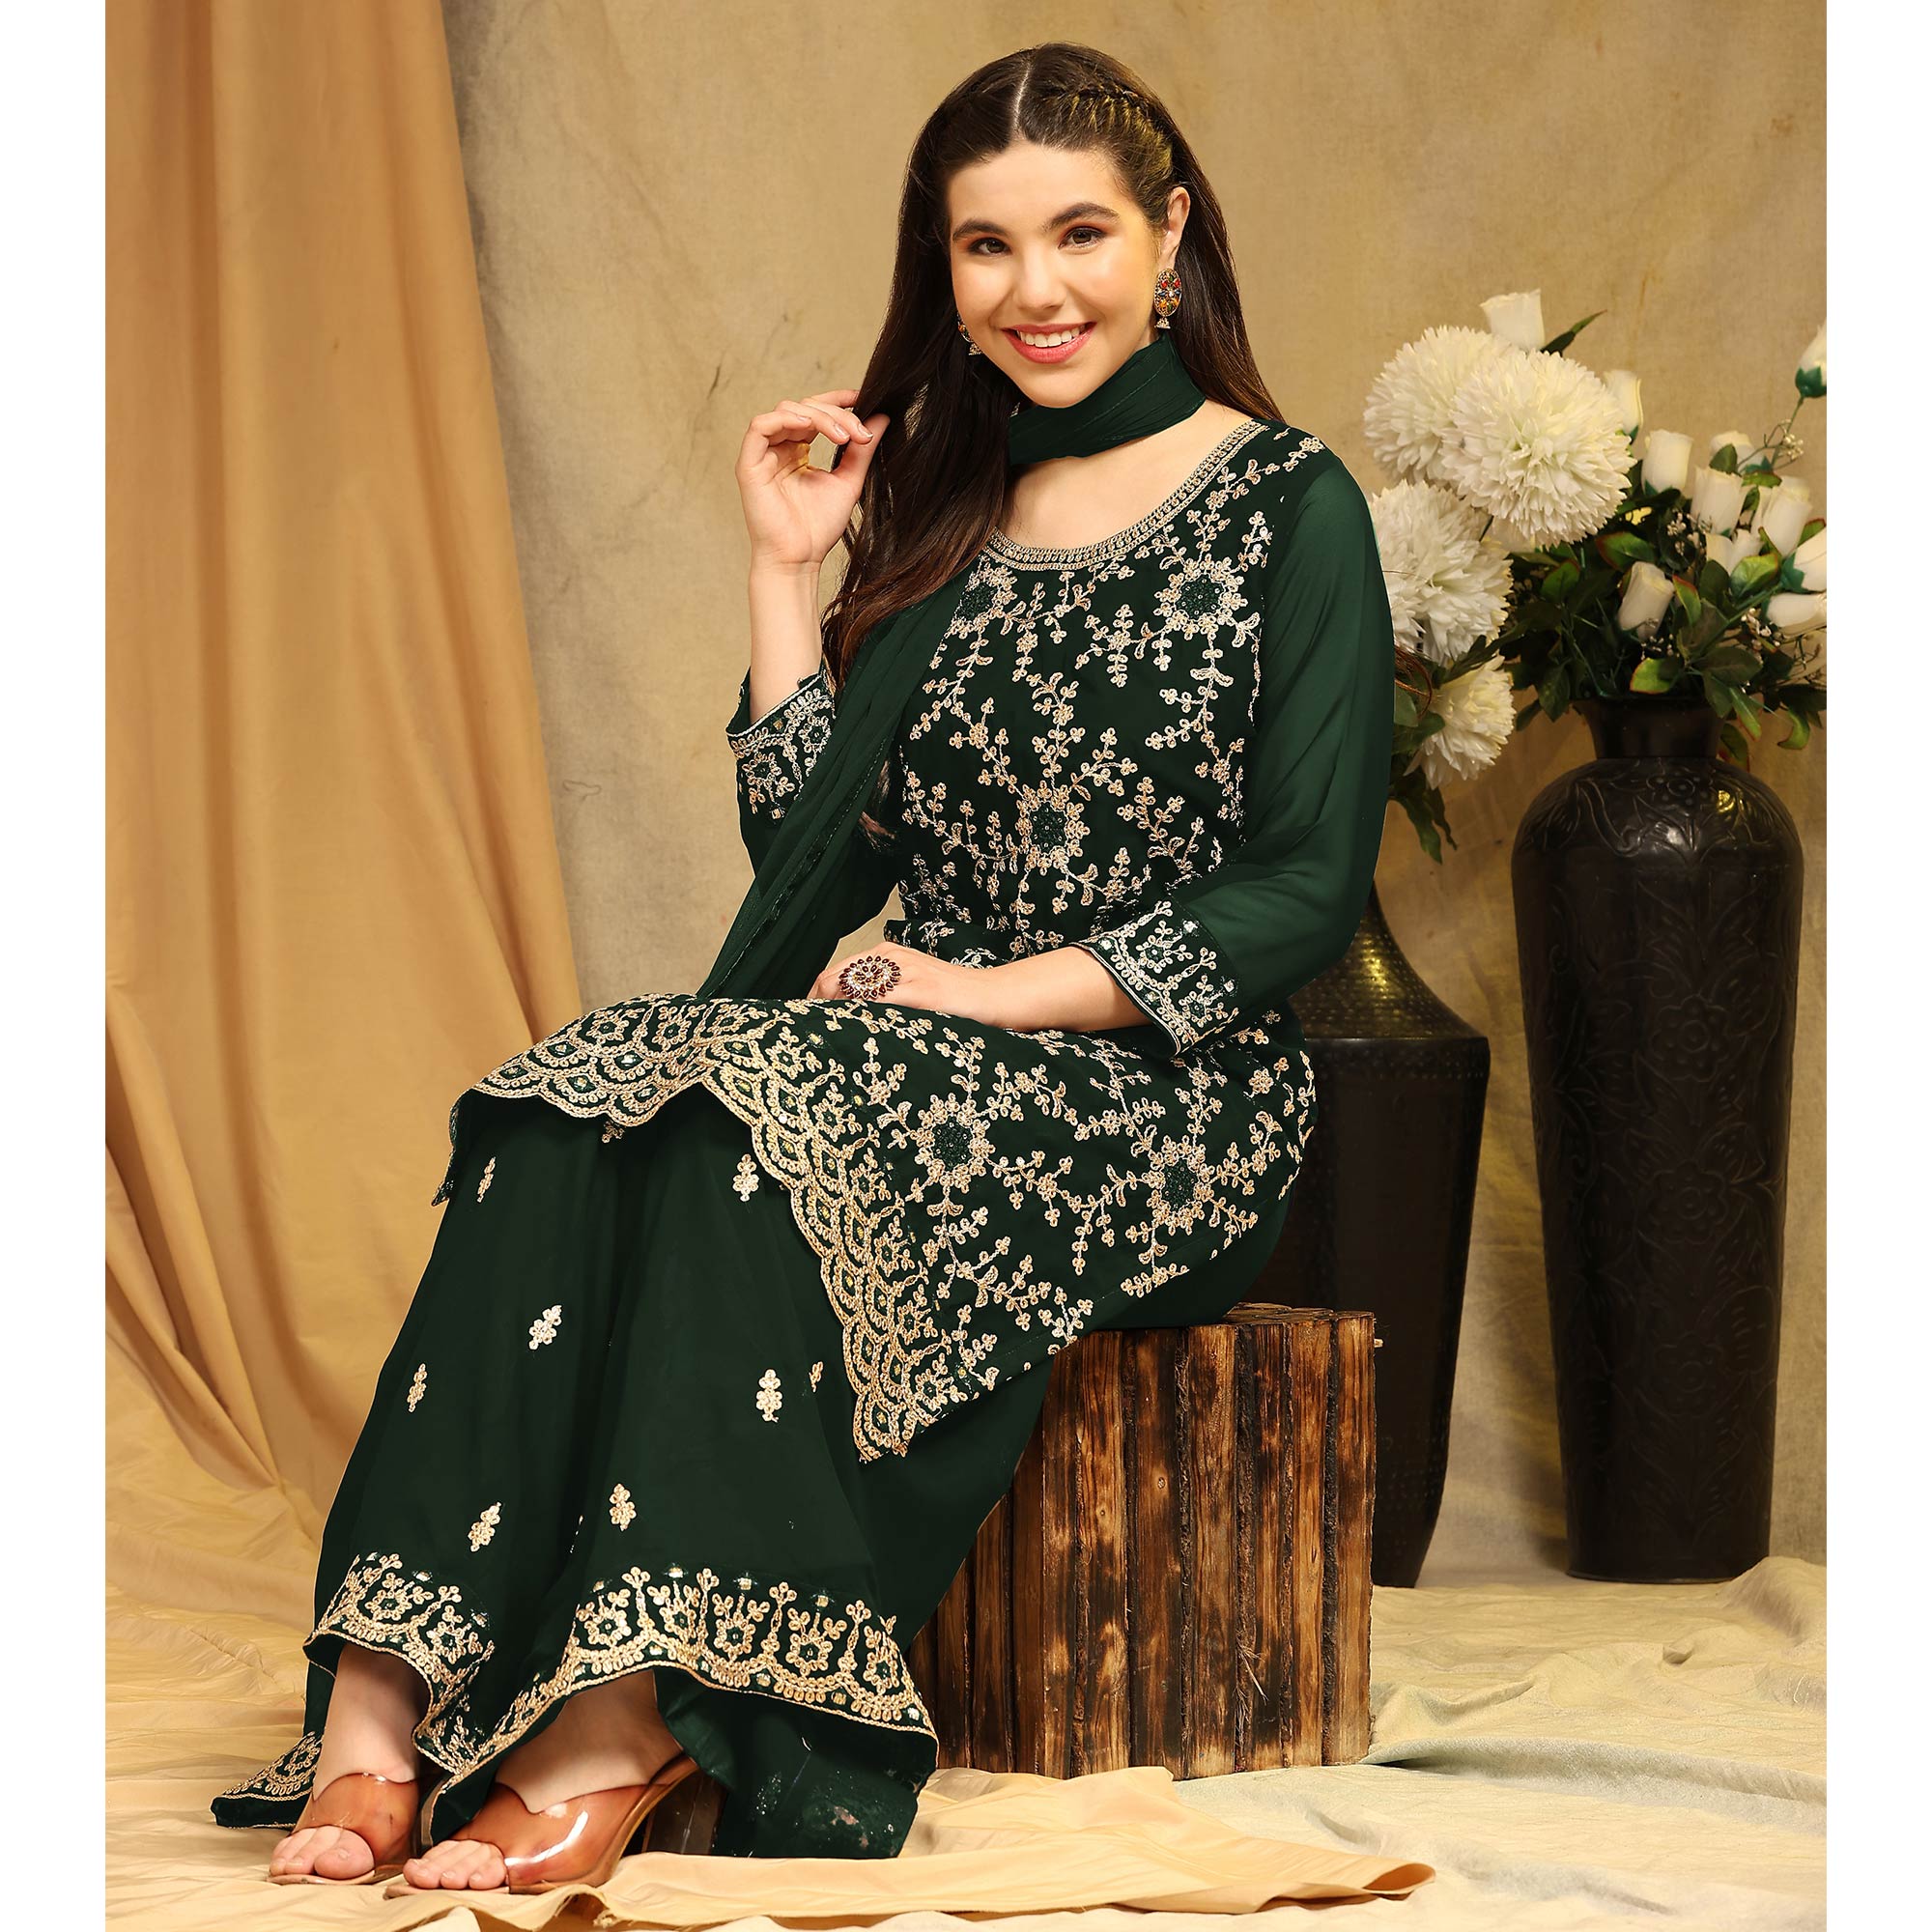 Bottle Green Floral Embroidered Georgette Semi Stitched Suit